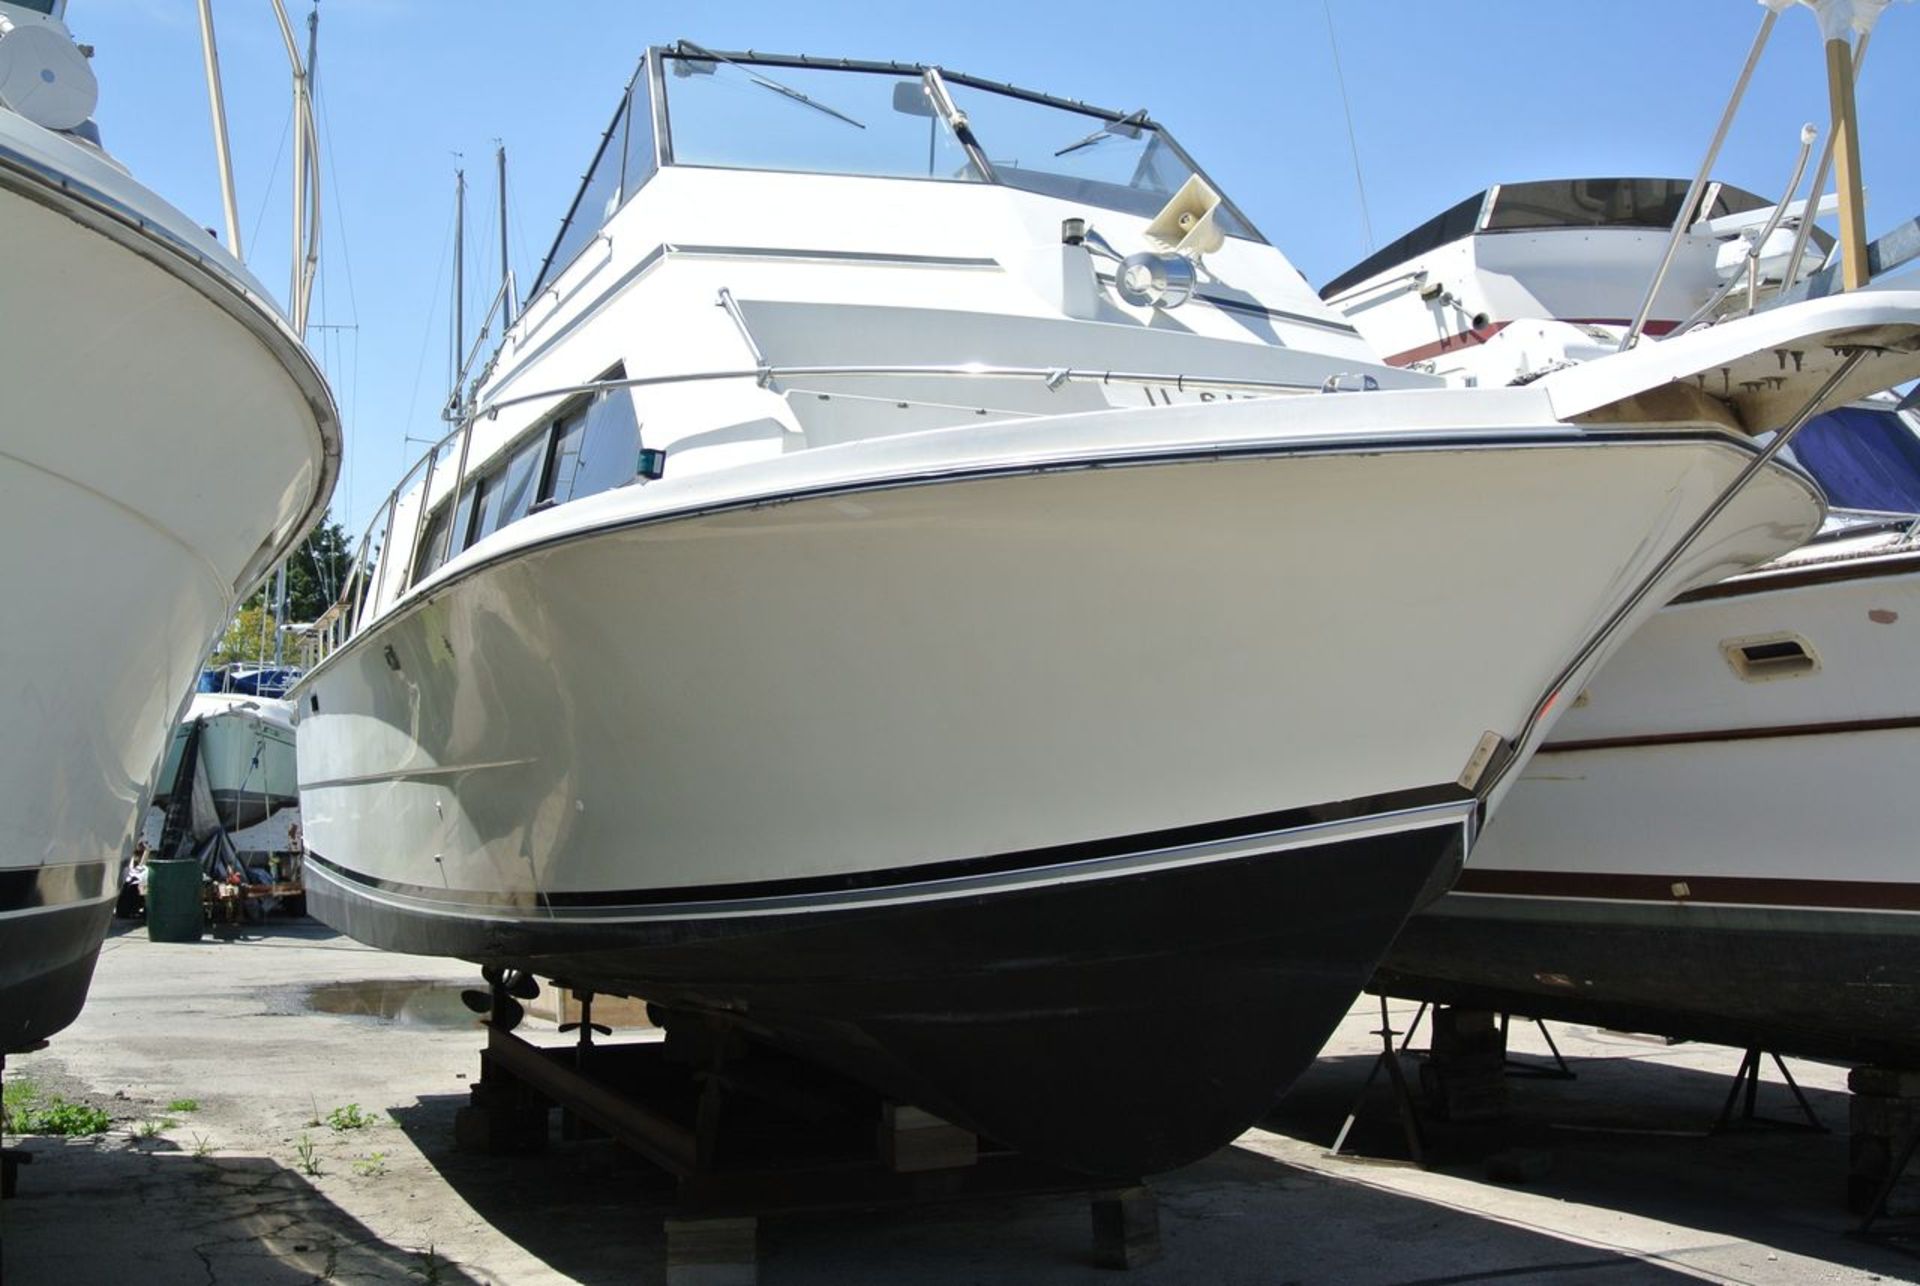 "Snowy Owl" - 1983 Carver Yachts Mariner 3396 Power Boat, with Crusader 270 Engine; HIN: